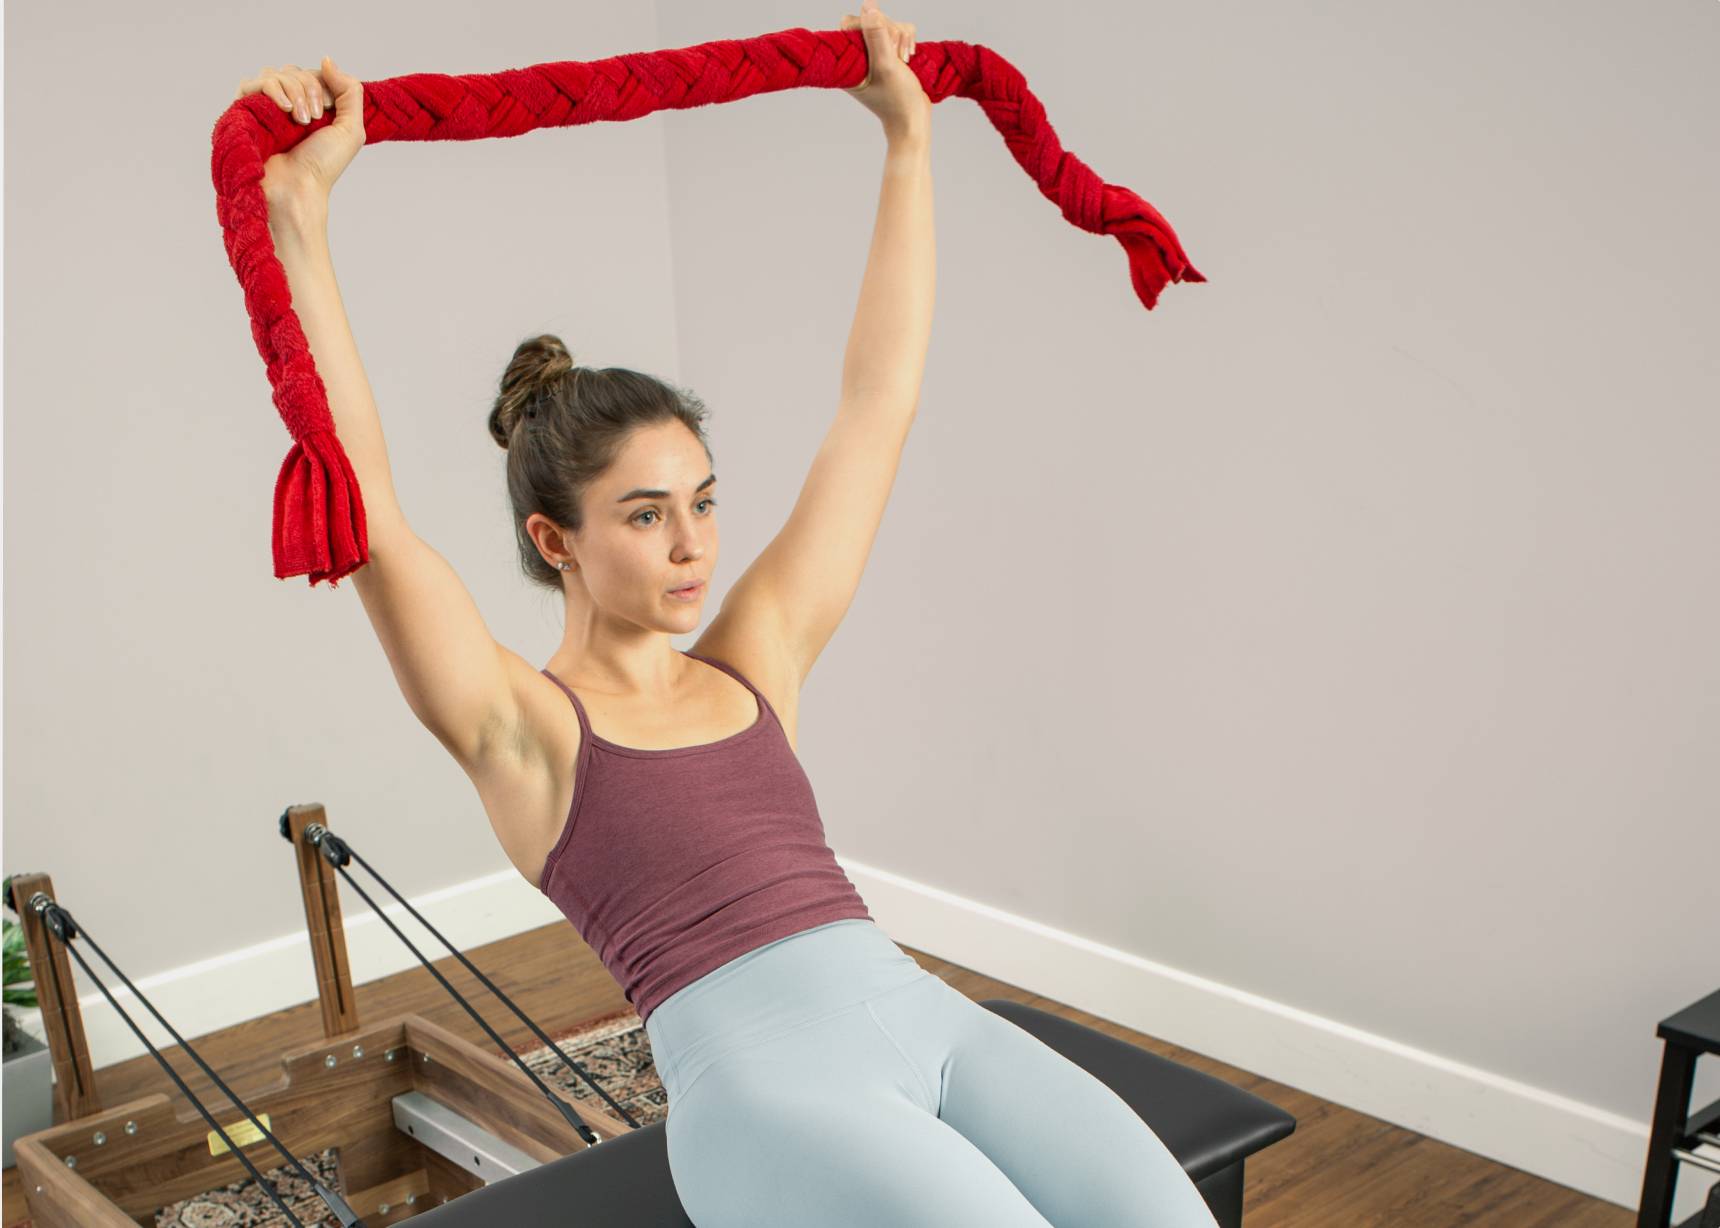 A woman gripping a red towel designed for Pilates strength and stability exercises.